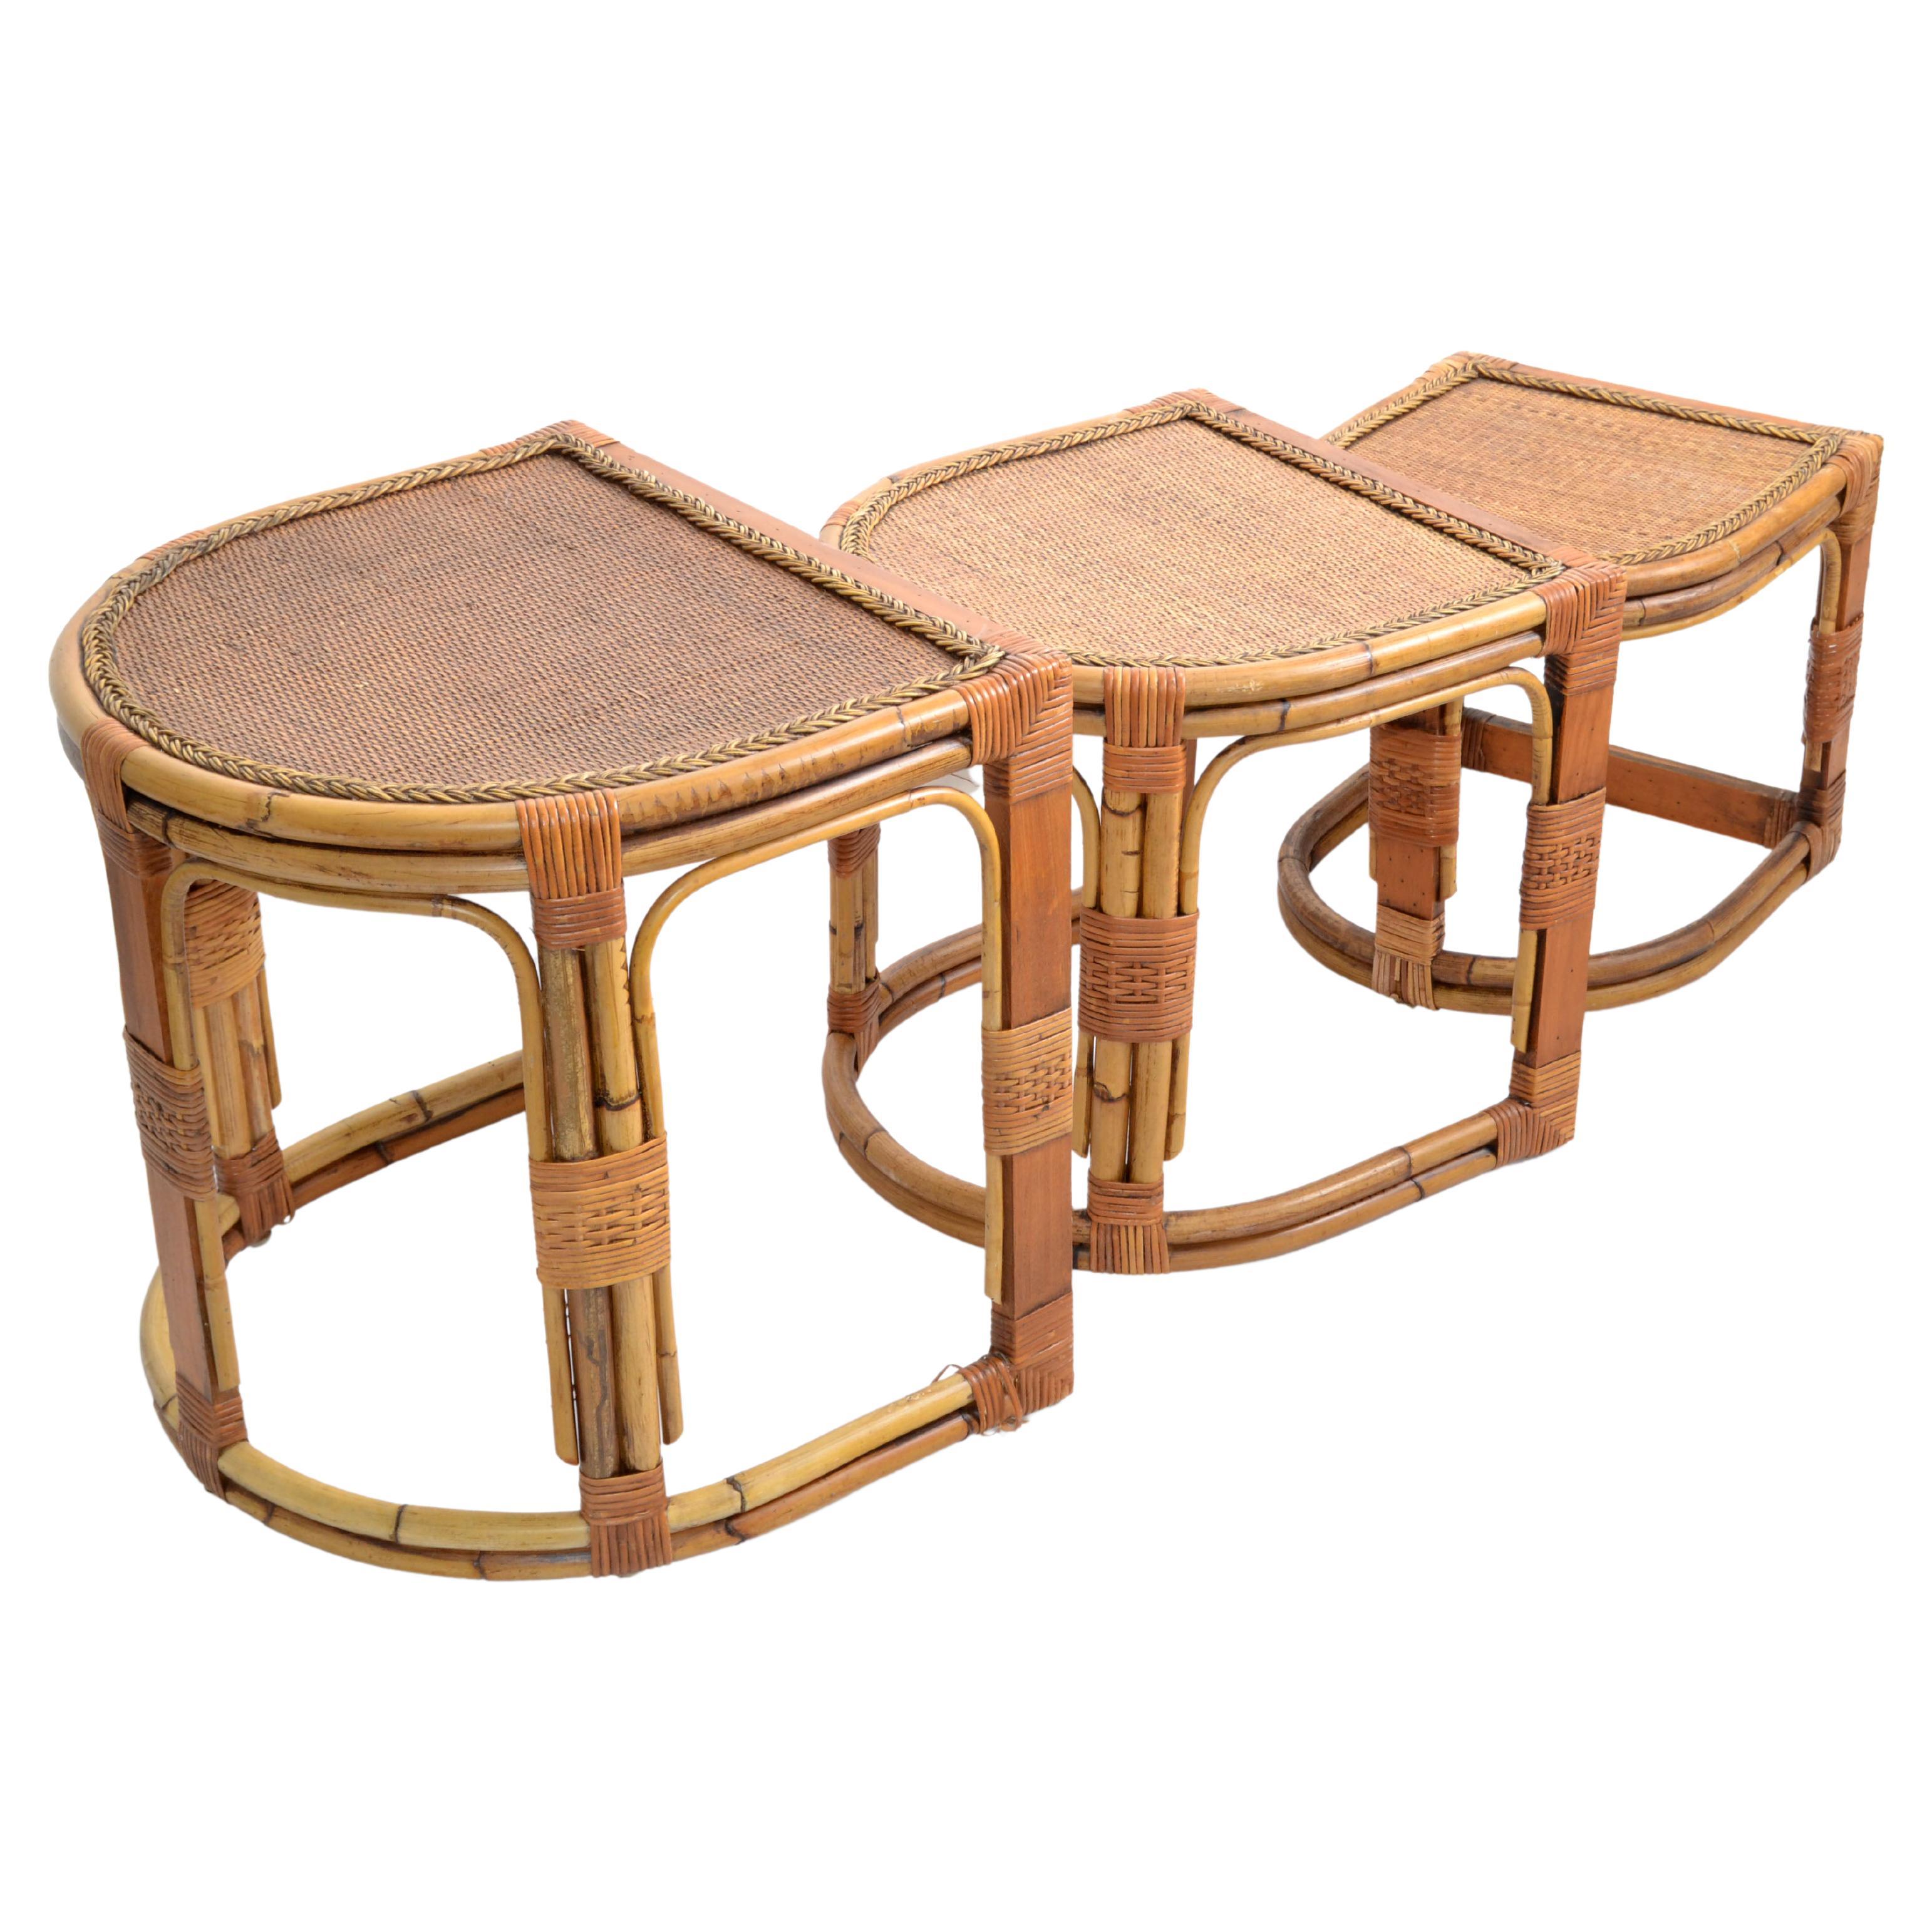 Semi-Circle Bamboo & Cane Nesting Tables / Stacking Tables Handcrafted, Set of 3 For Sale